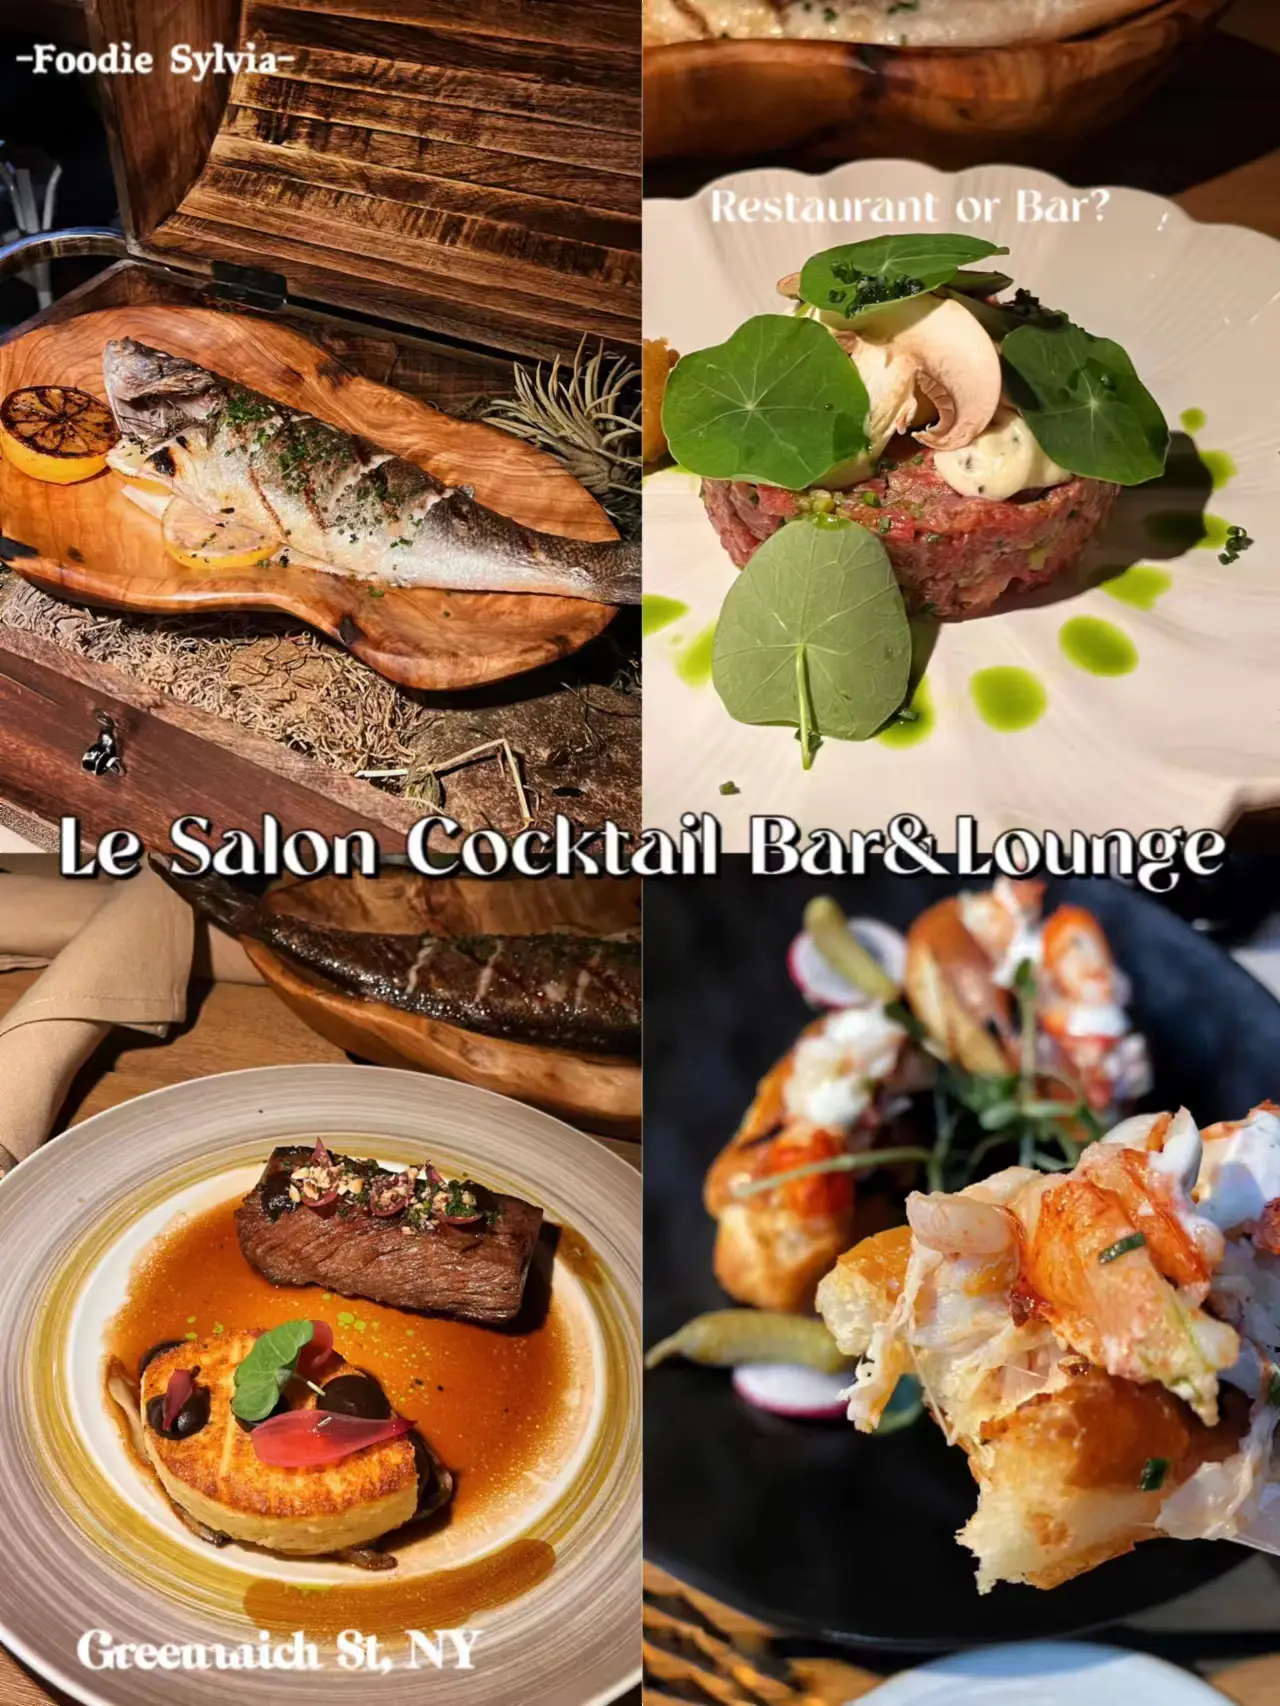 Review Viral French Restaurant In NYC· Le Salon's images